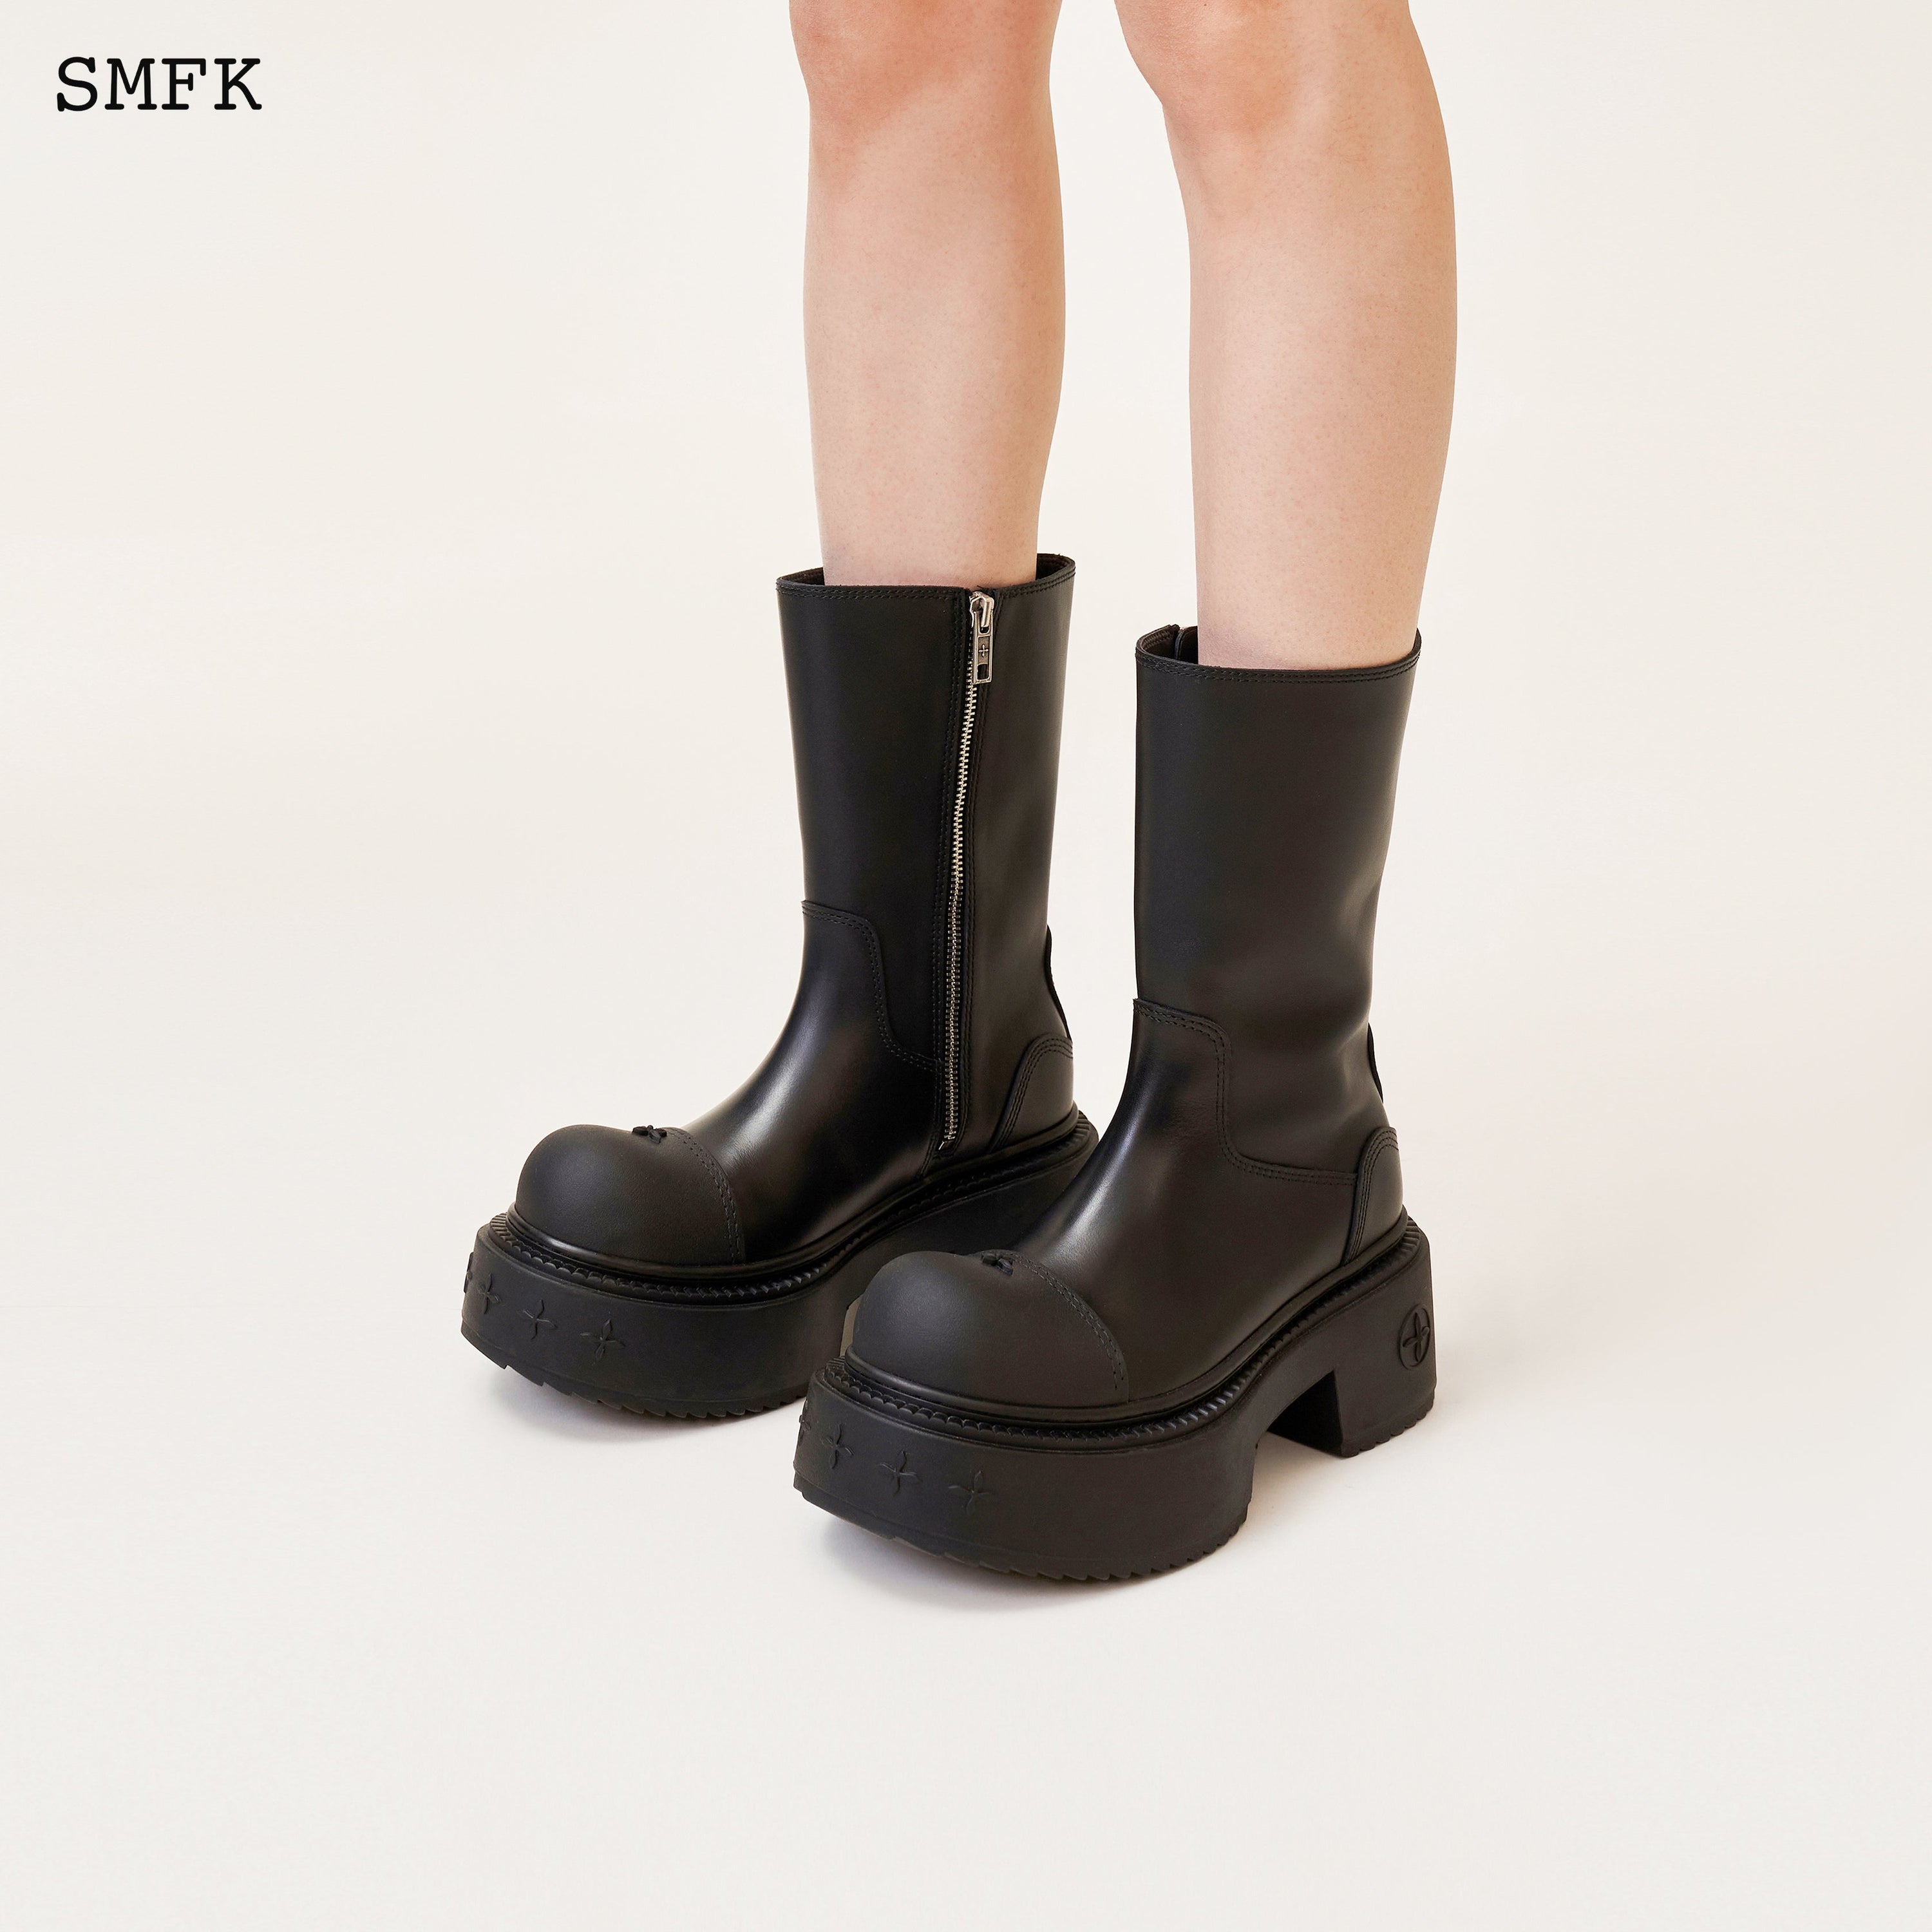 Compass Rider Low Boots In Black - SMFK Official